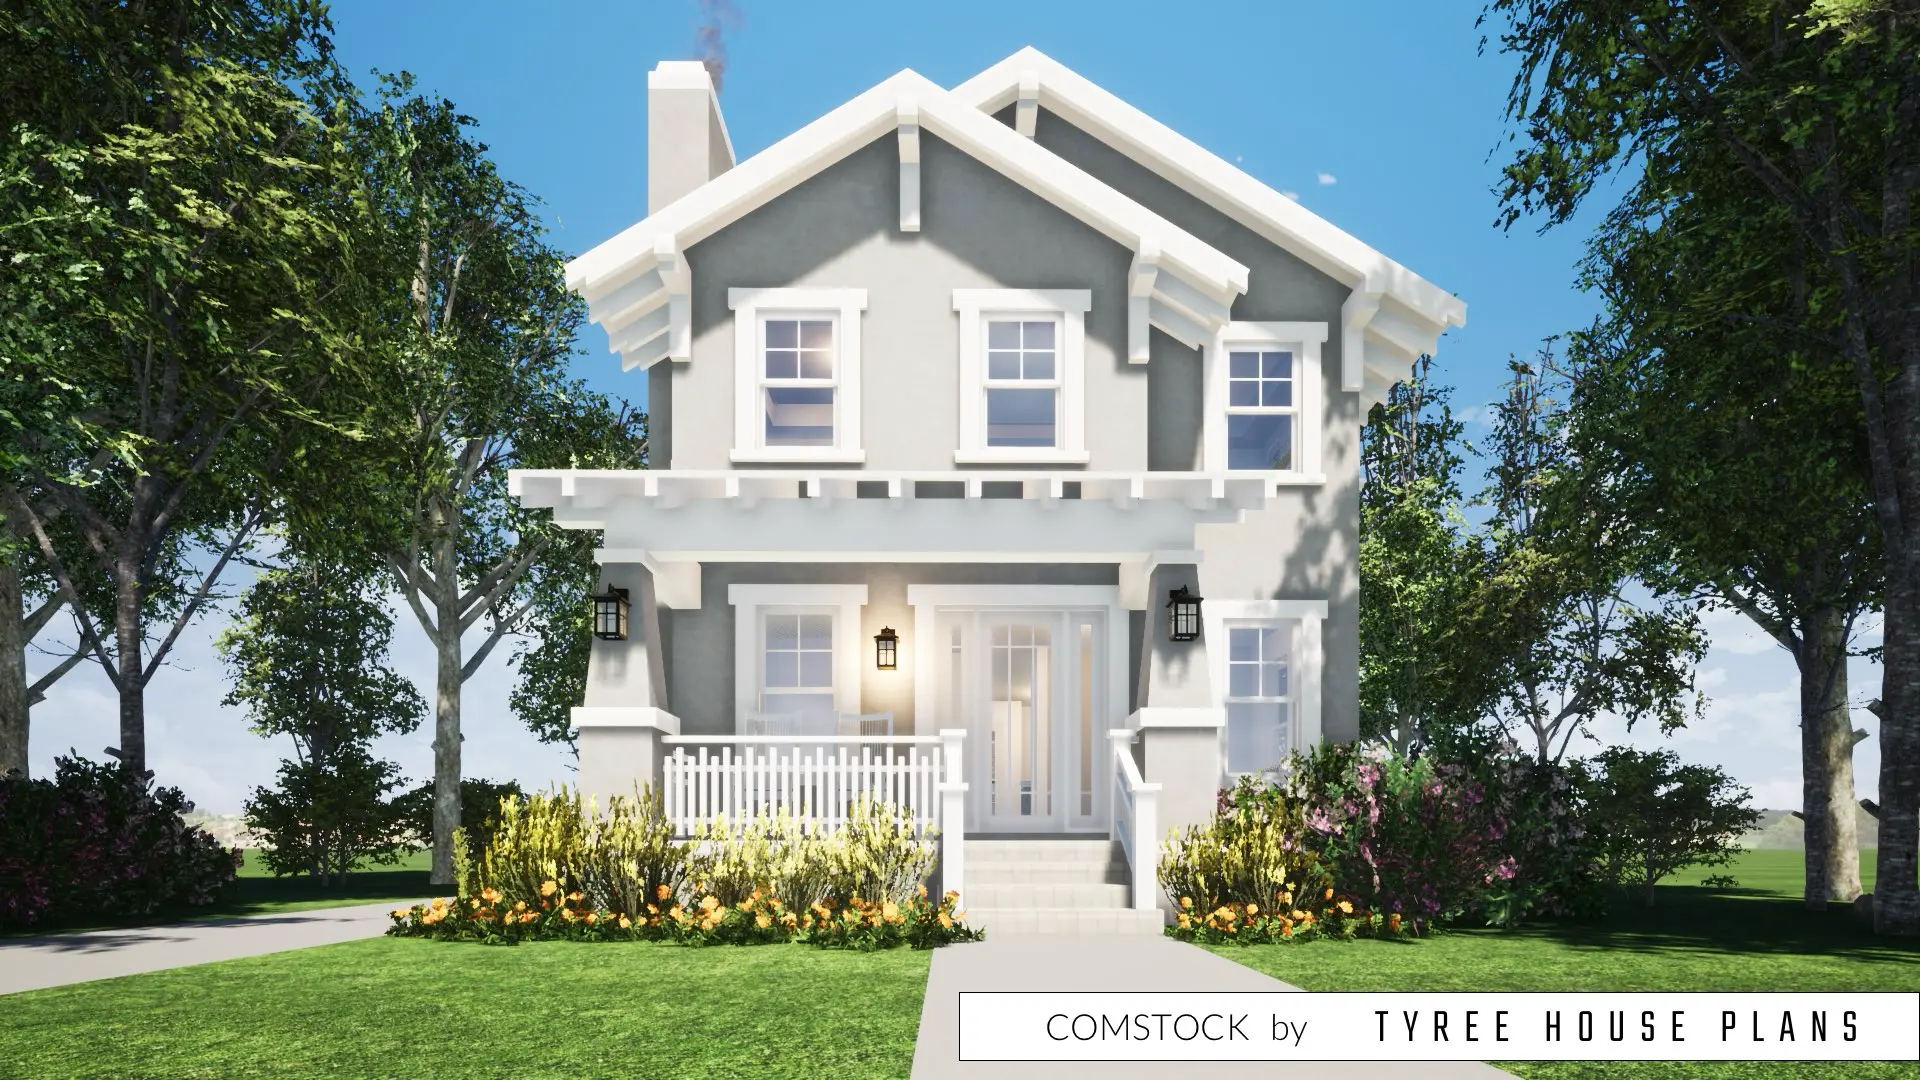 Front view. Comstock by Tyree House Plans.